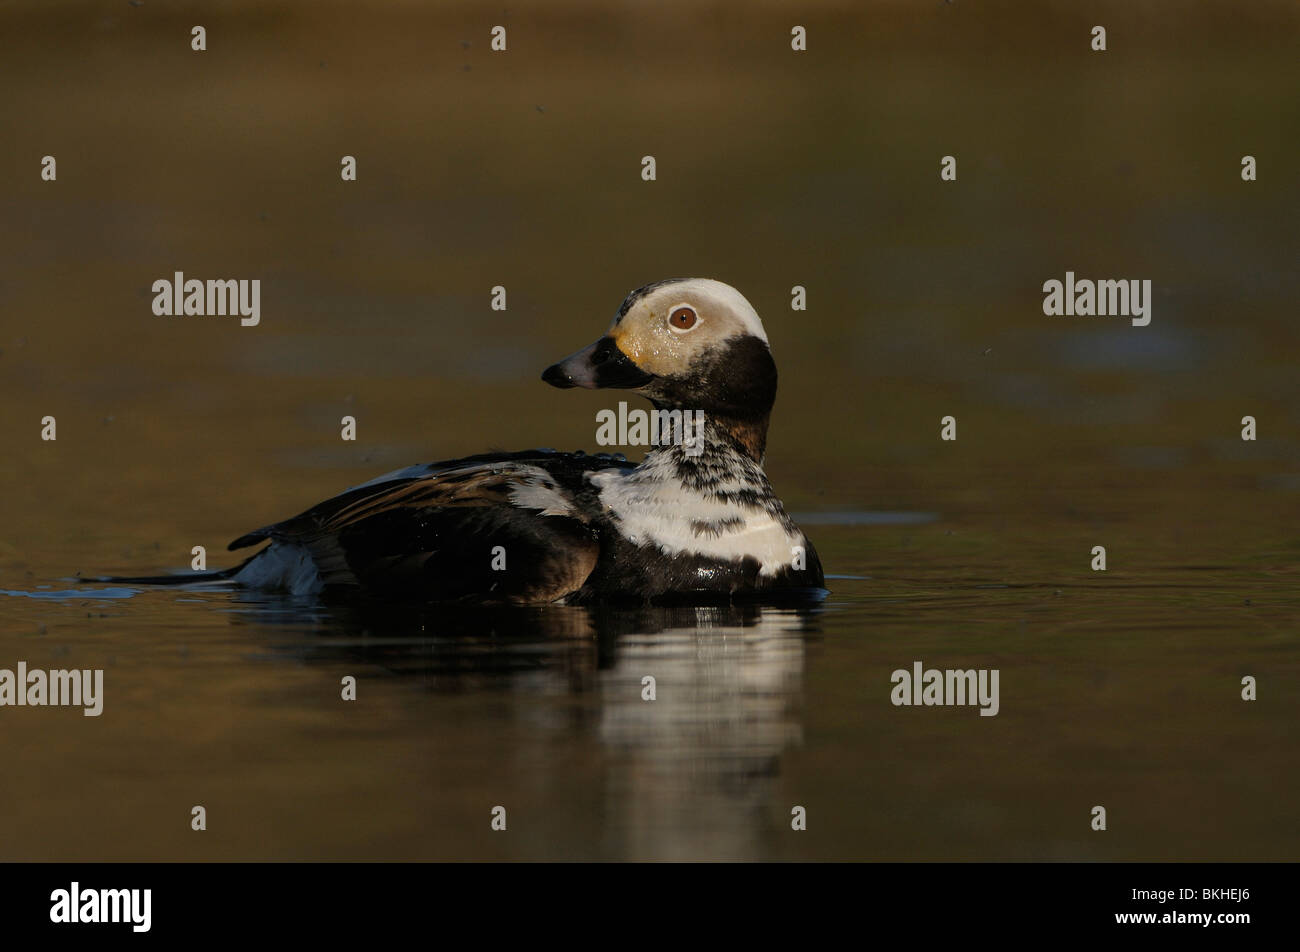 Man IJseend in broedkleed zwemmend in een meertje met allemaal muggen; Adult male Long-tailed Duck in breeding plumage swimming in a small lake with a lot of bugs Stock Photo